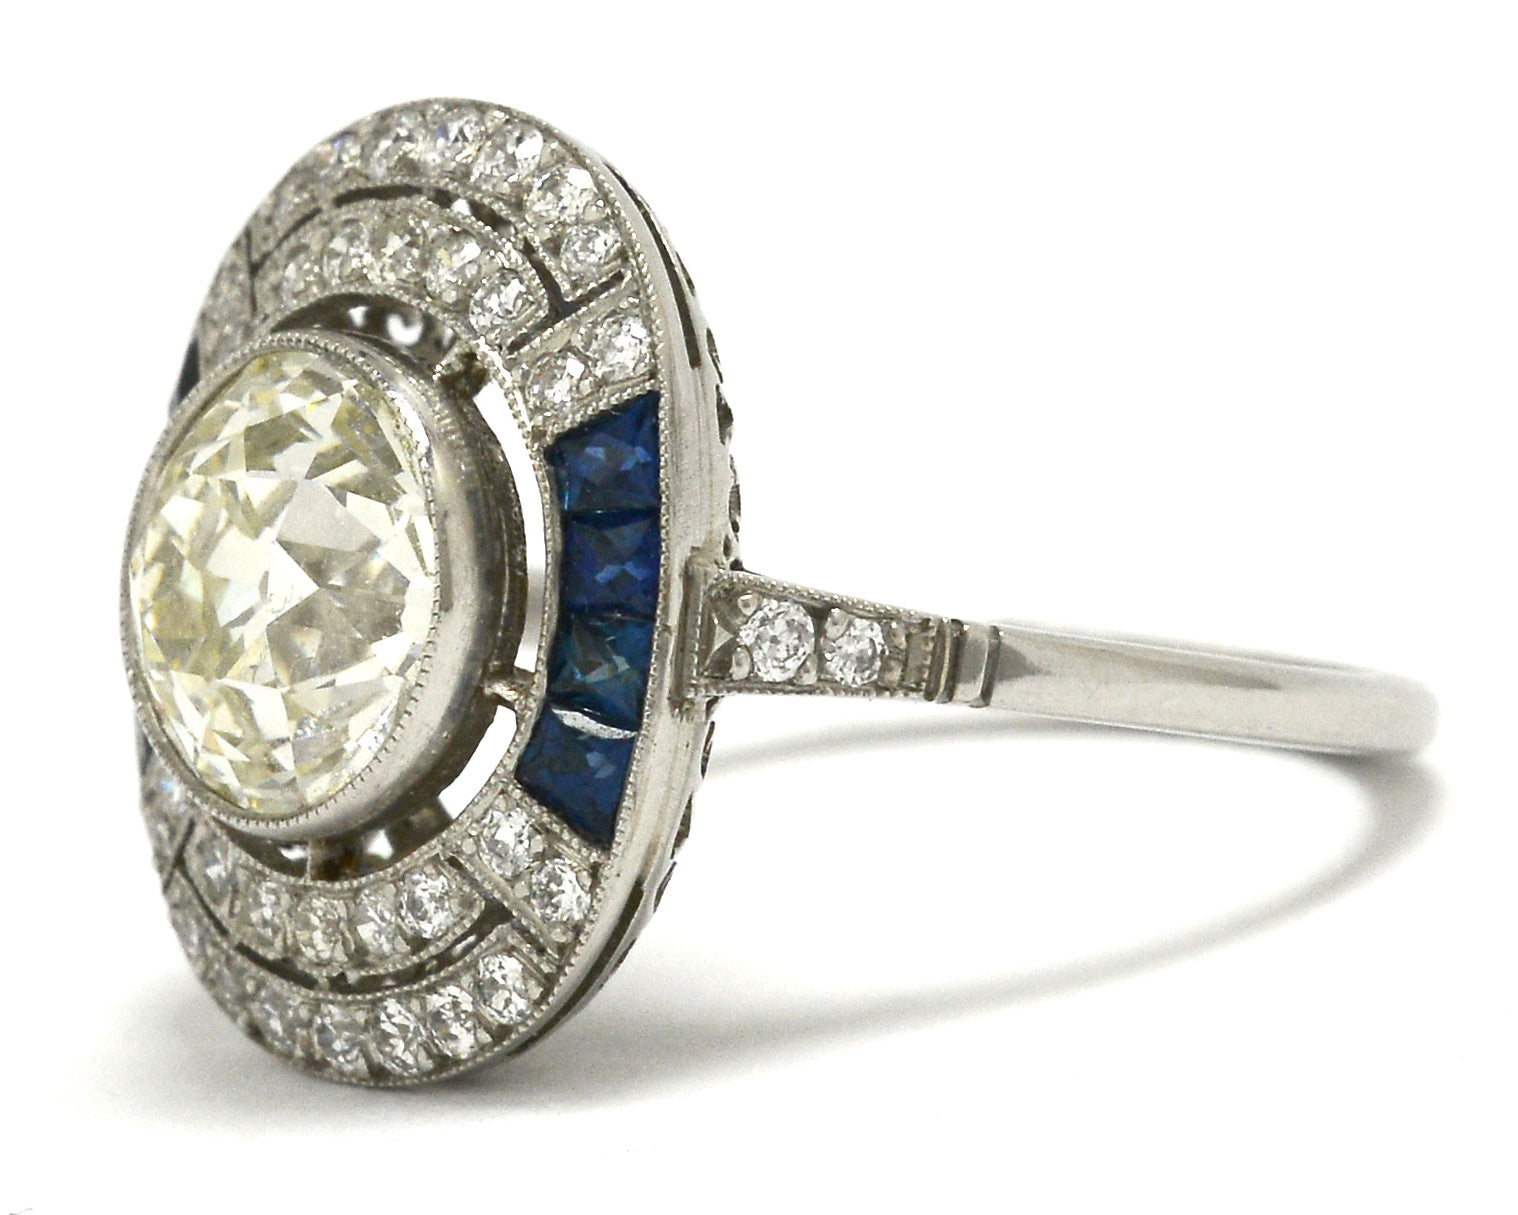 An antique diamond is set in an Art Deco revival engagement ring.